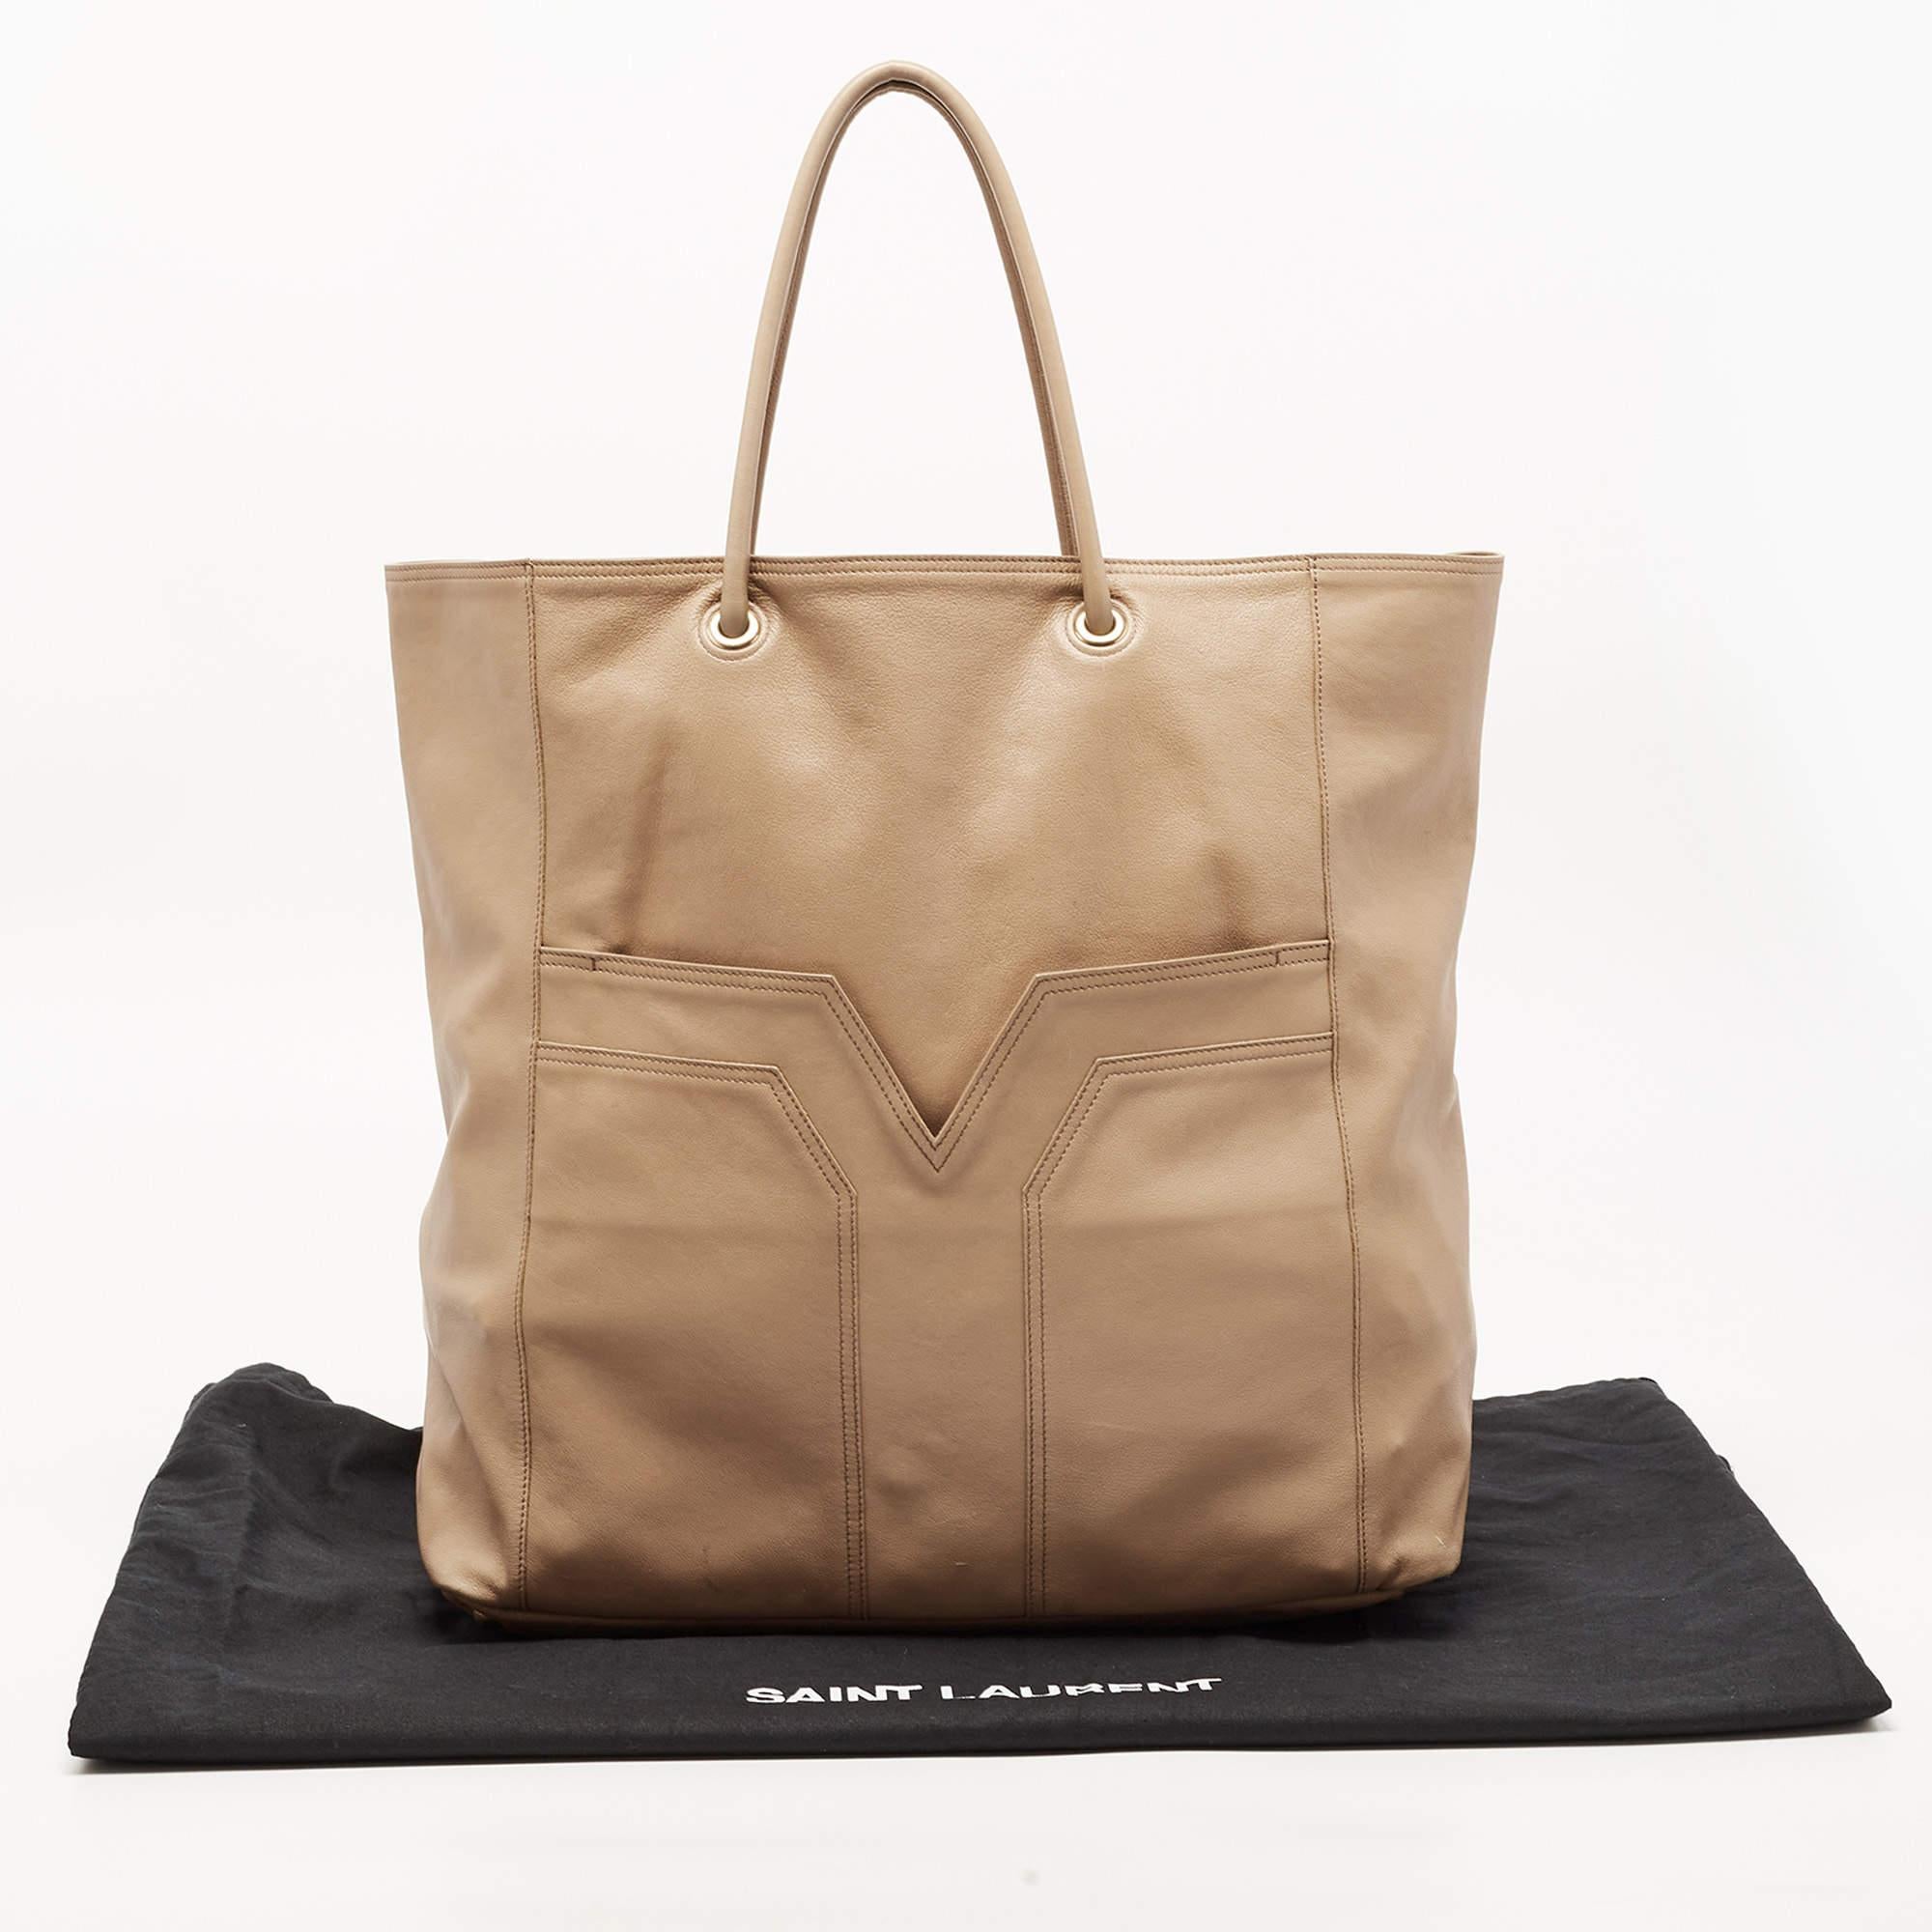 Yves Saint Laurent Beige Leather Lucky Chyc Tote 15